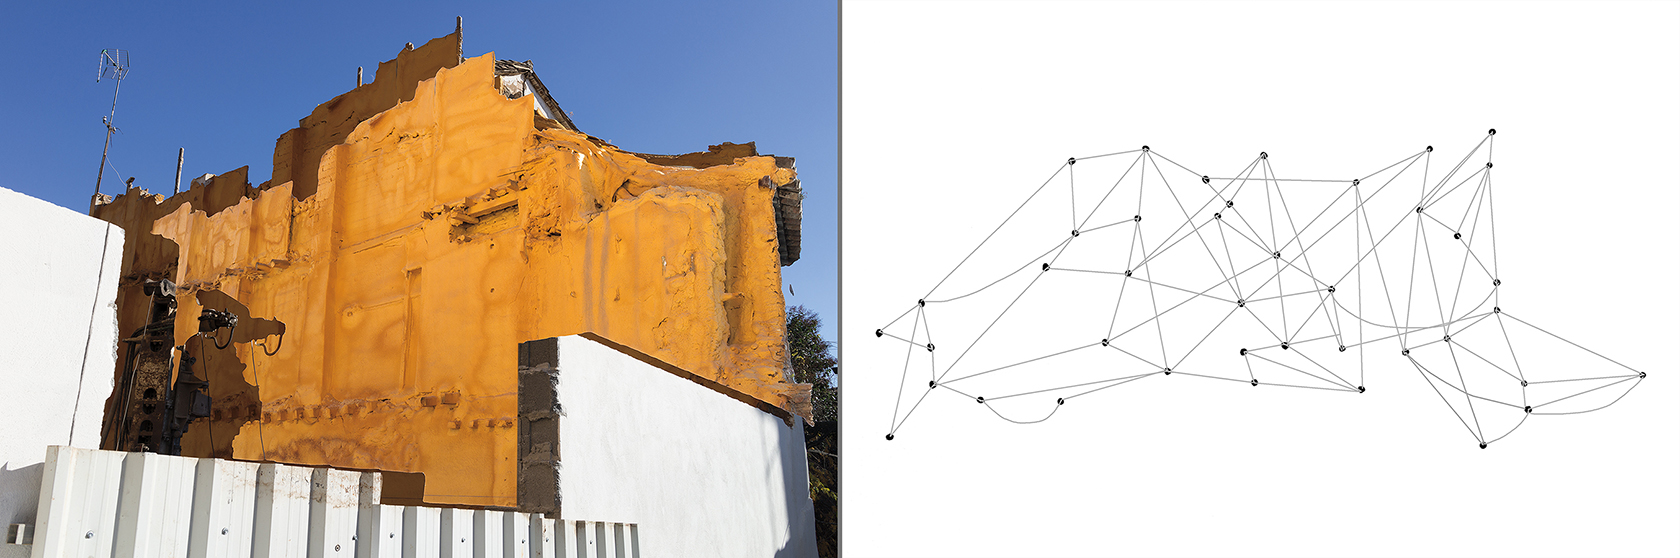 Side by side images of a golden yellow building against blue sky, and a line drawing mapping the building shape